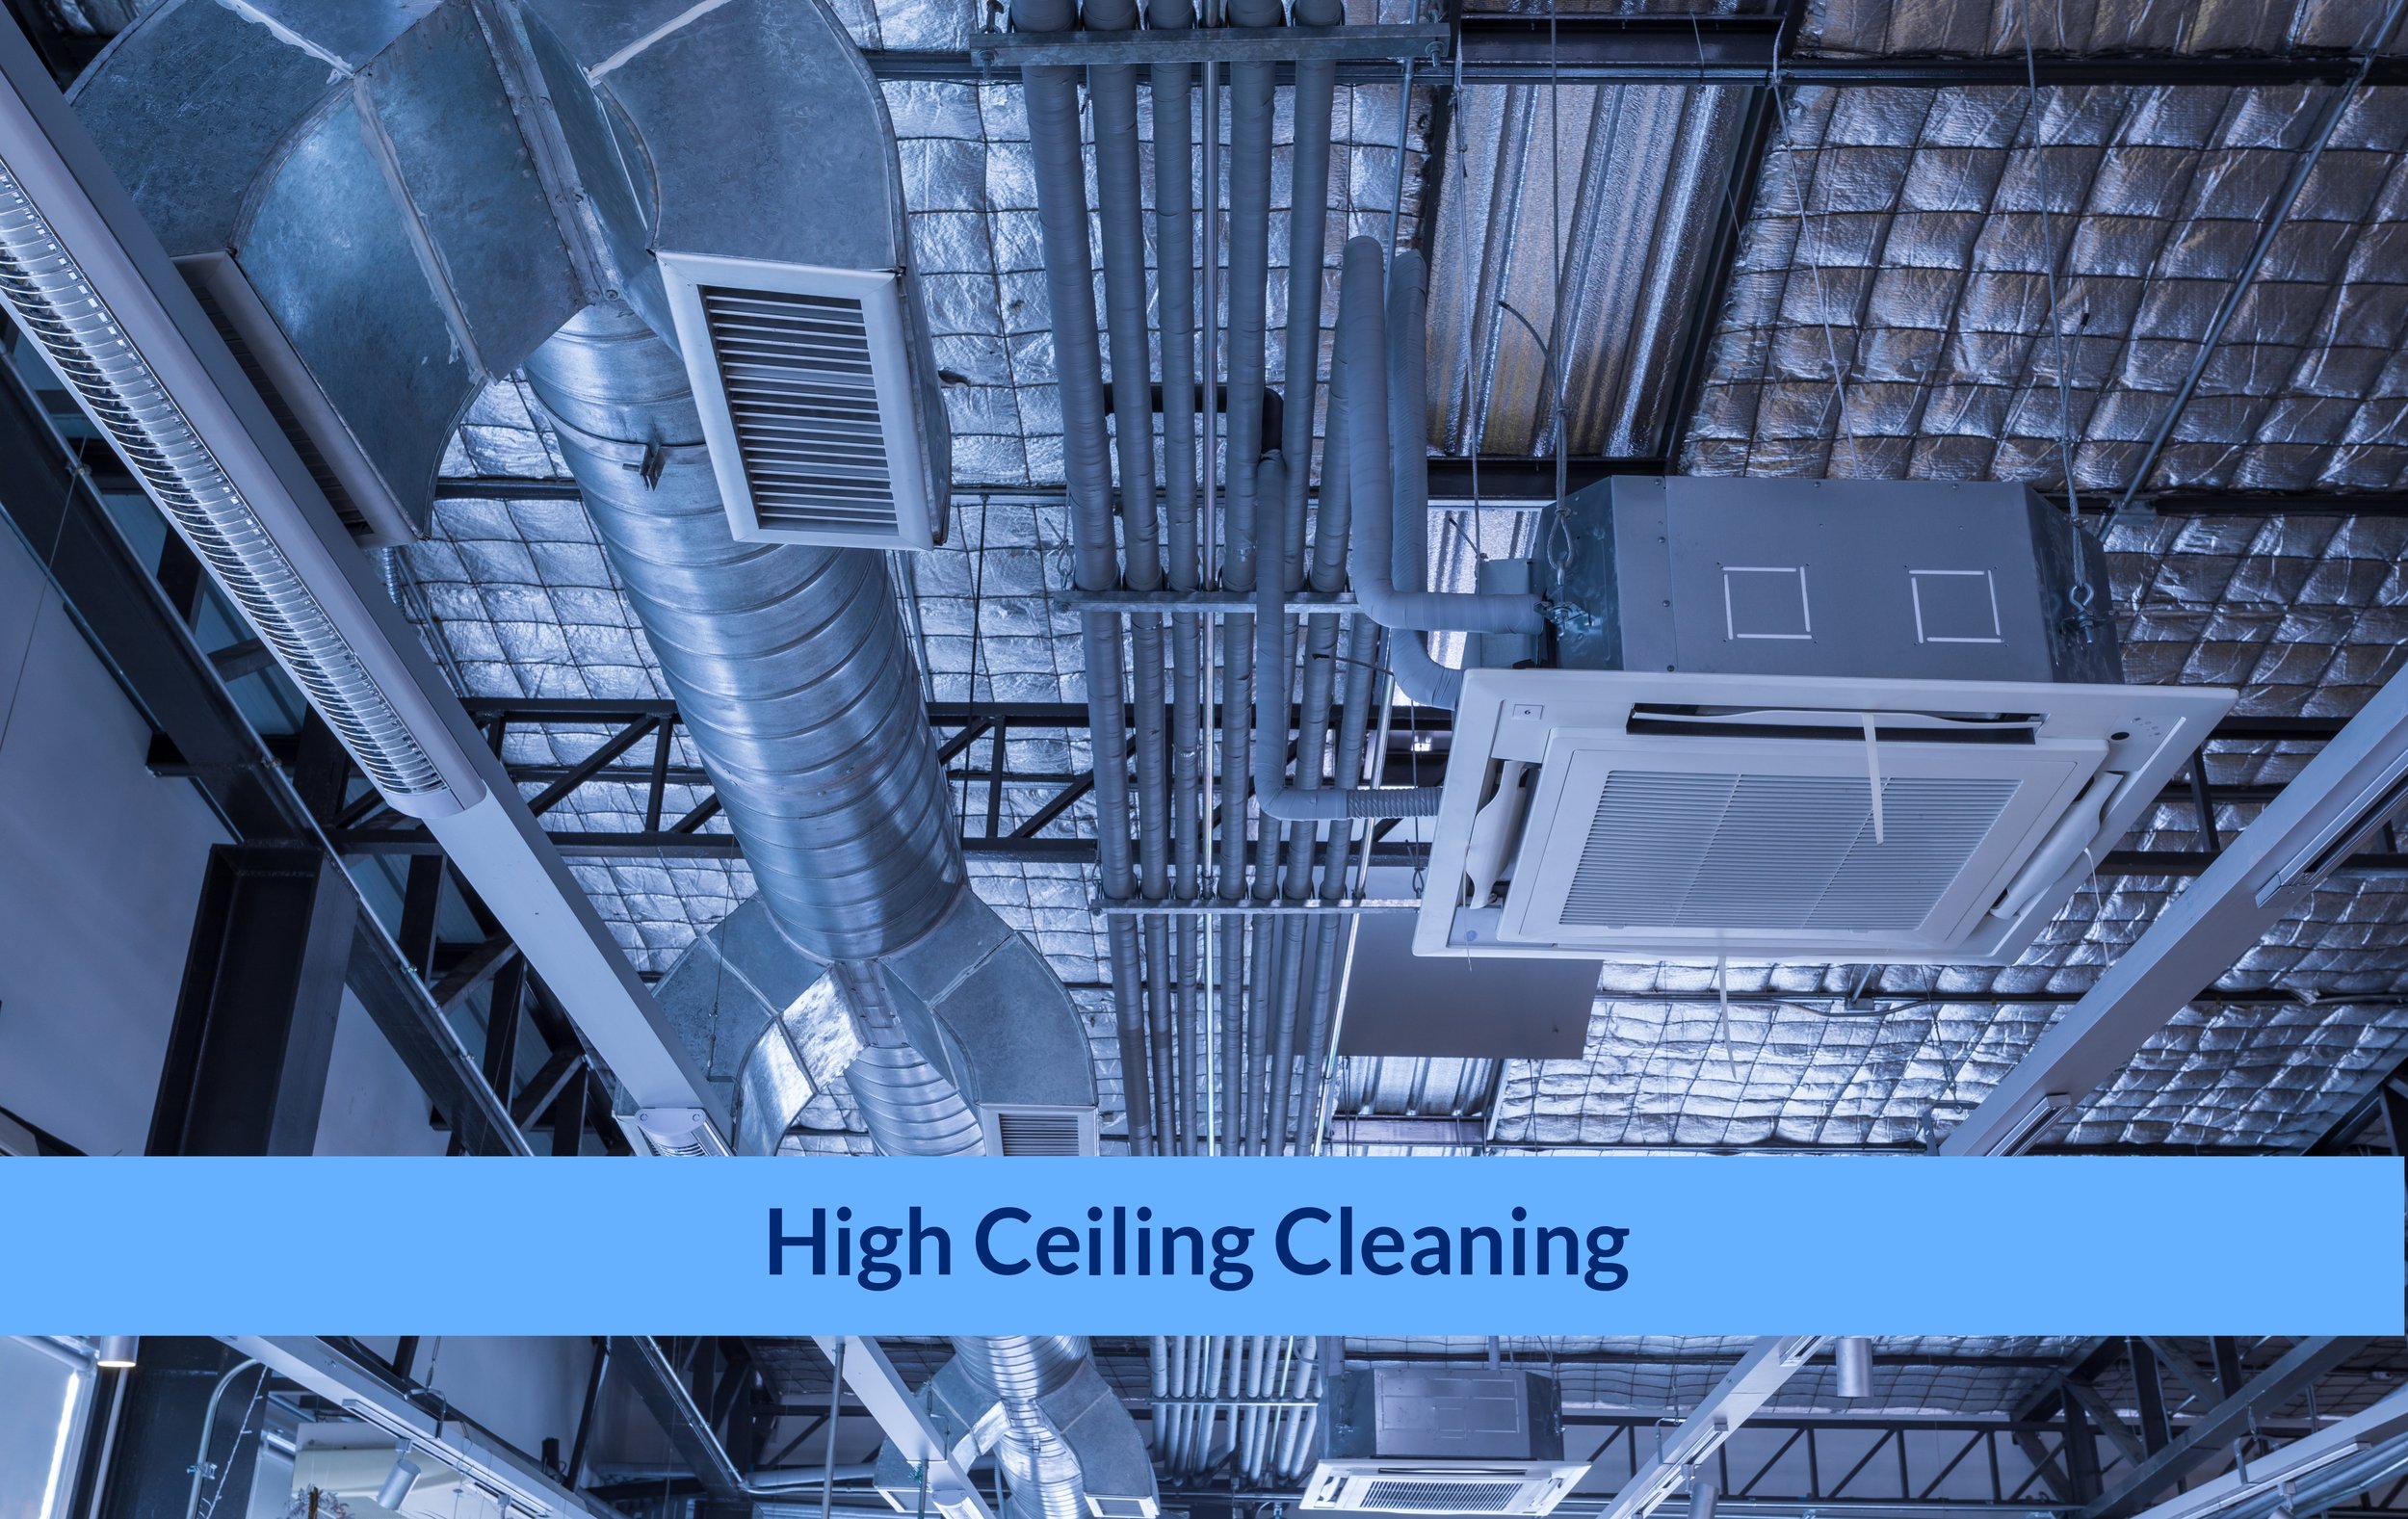 High Ceiling Cleaning 1 ?width=2500&name=High Ceiling Cleaning 1 